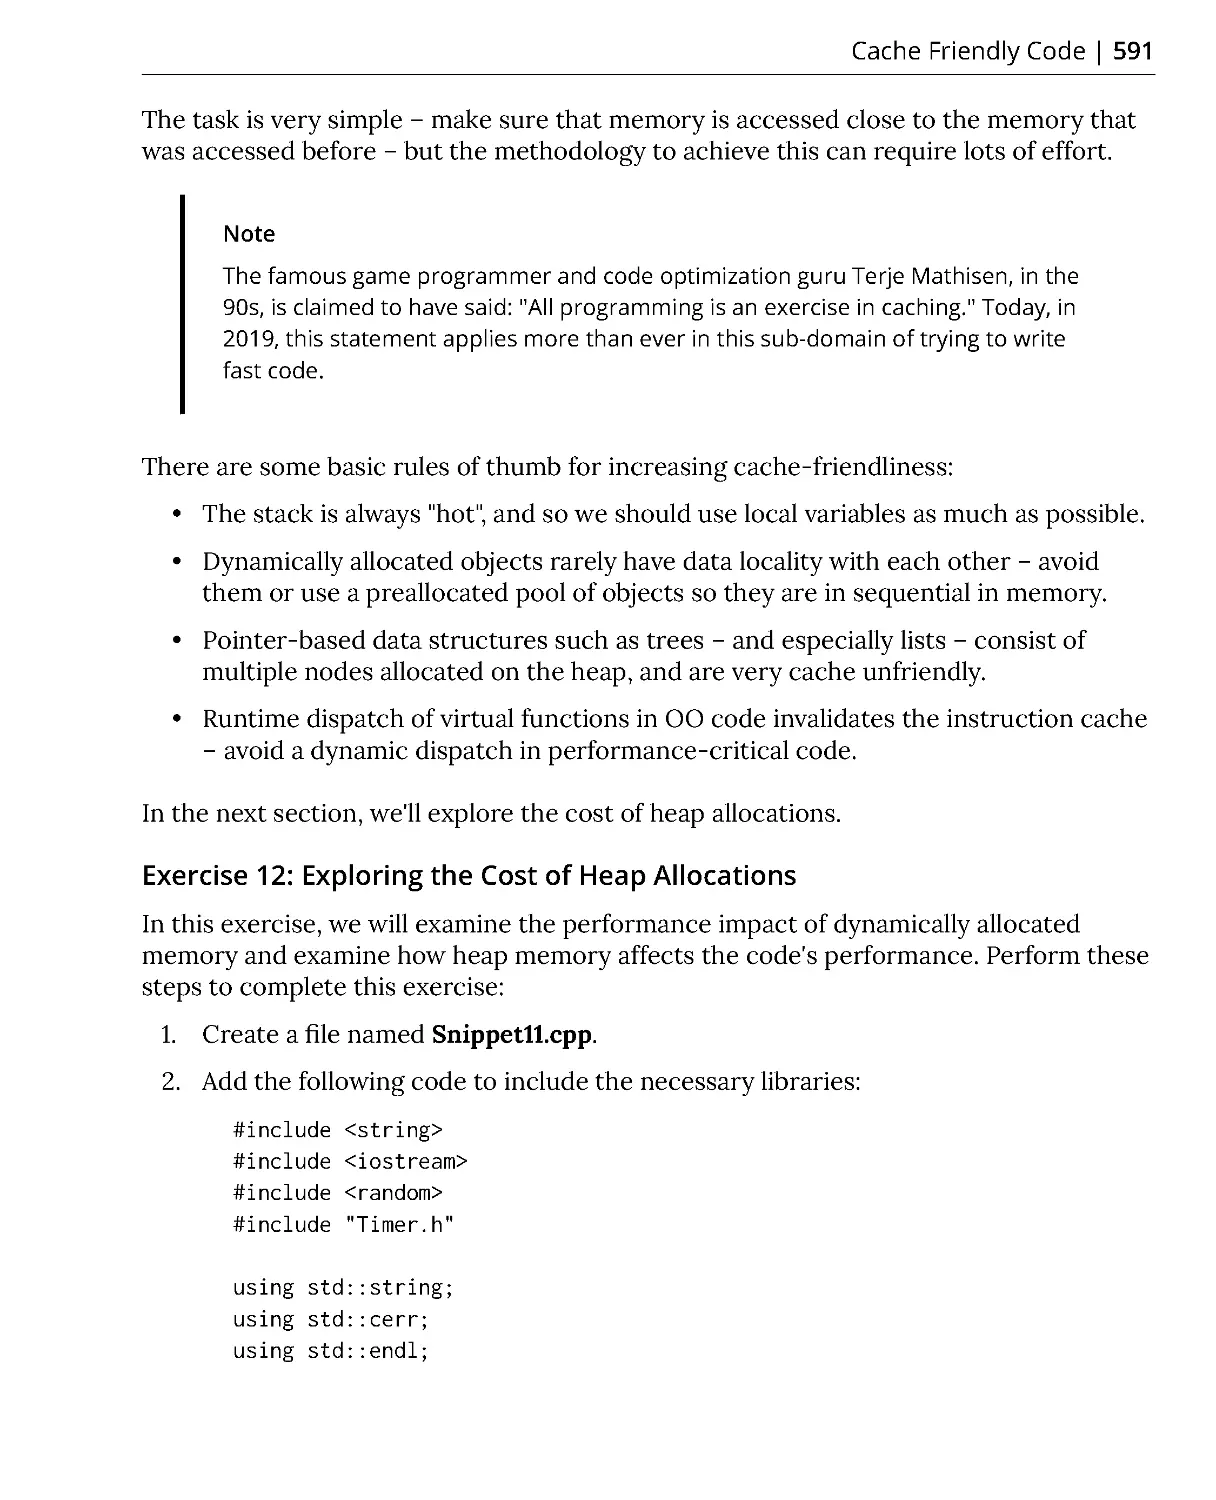 Exercise 12: Exploring the Cost of Heap Allocations